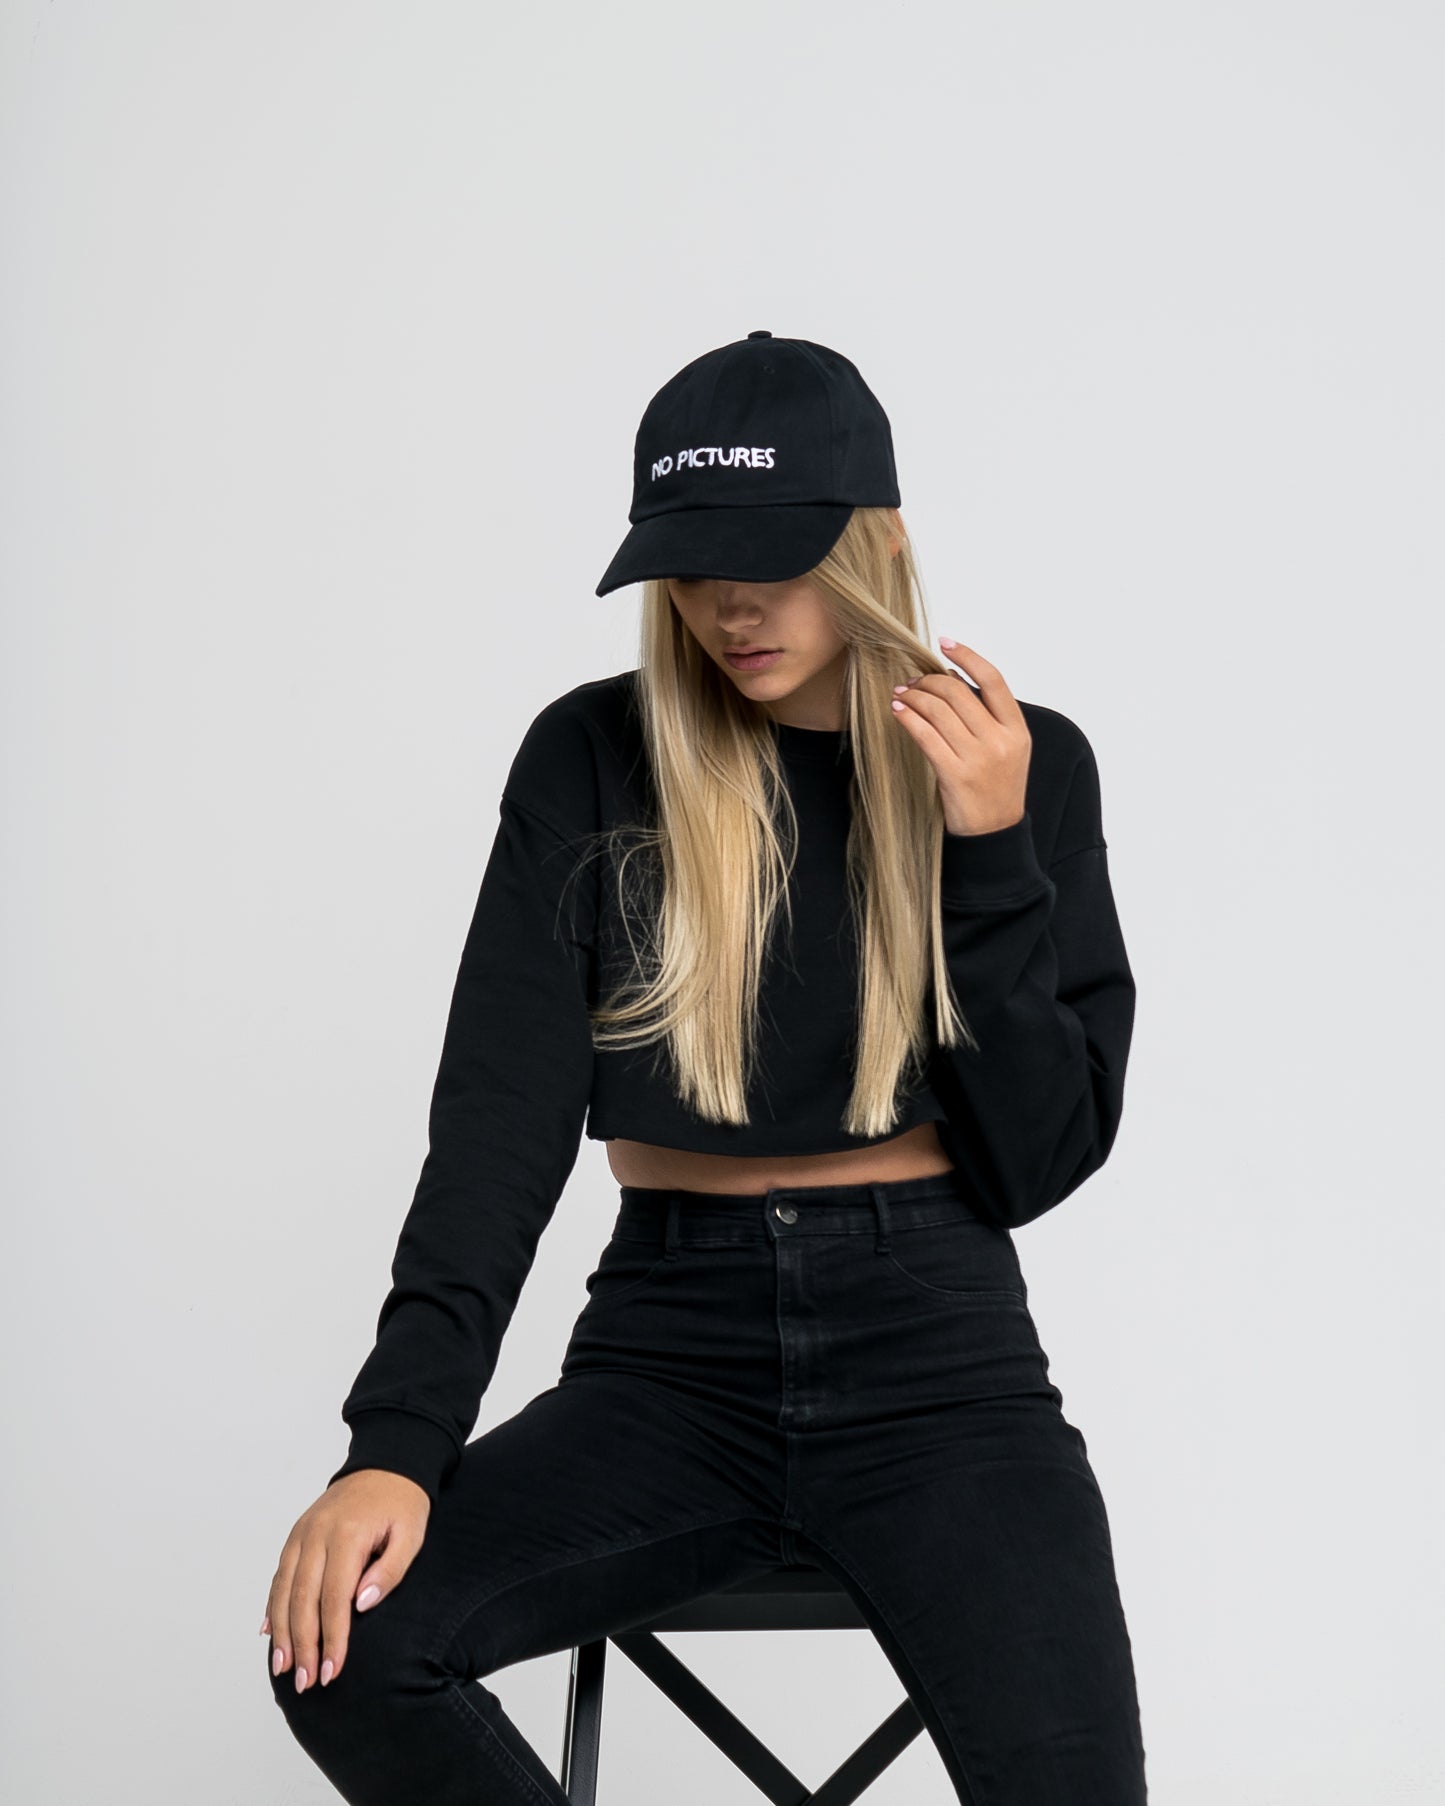 Nasaseasons No Pictures embroidered baseball hat in black